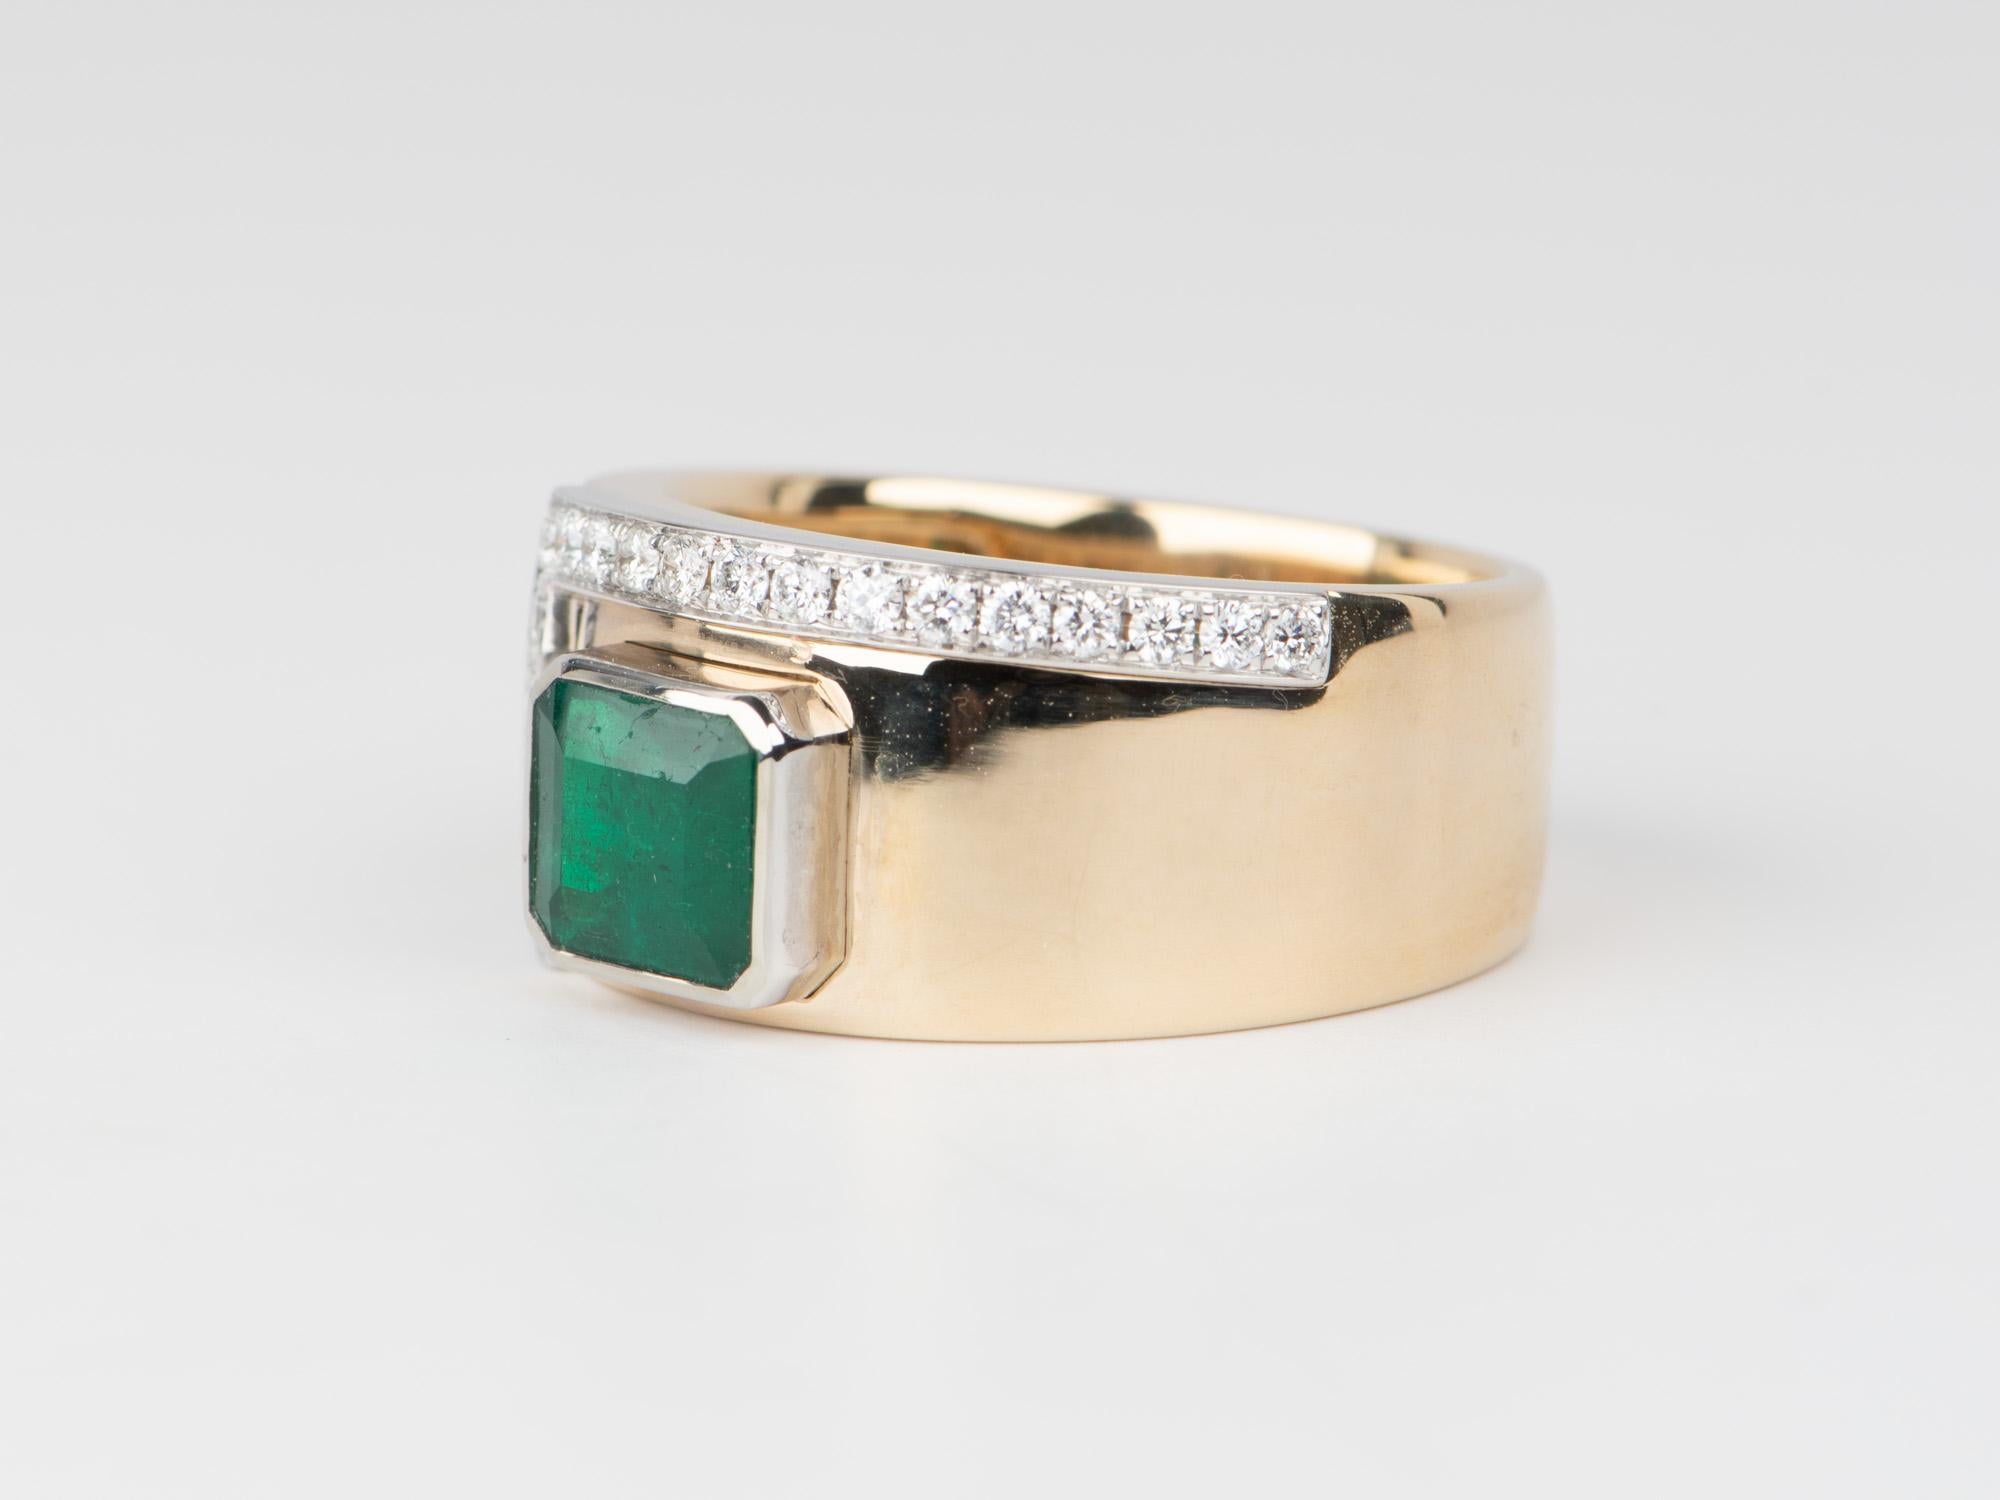 Emerald Cut Emerald Bezel Set on 10.5mm Wide Band with Diamond Accent 14K Gold  R6668 For Sale